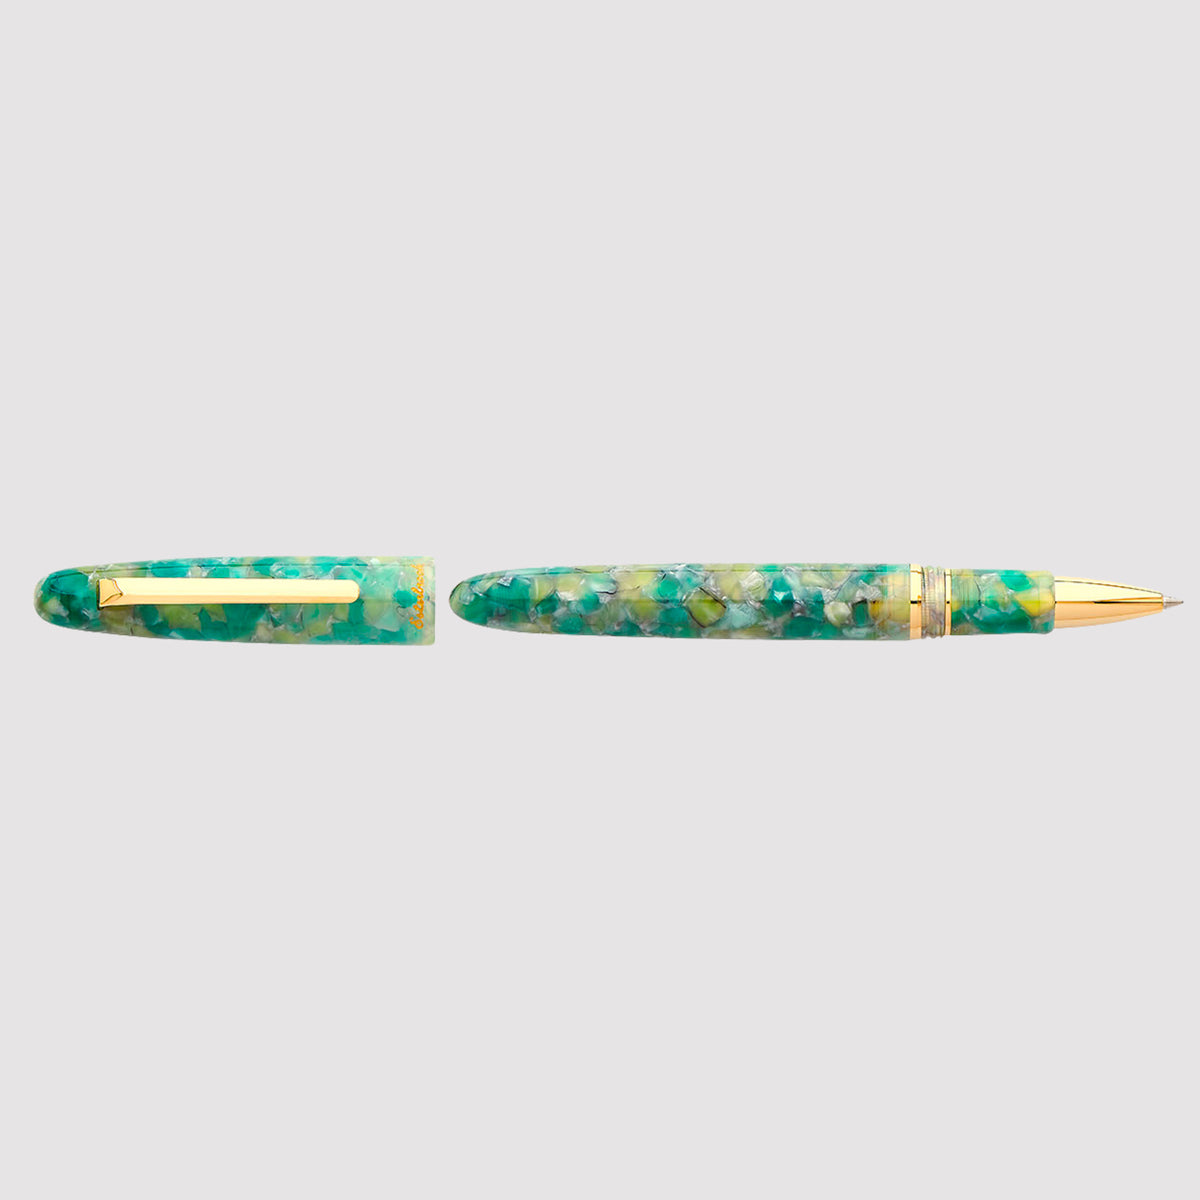 Sea Glass Collection Regular Size Gold Trim - Rollerball